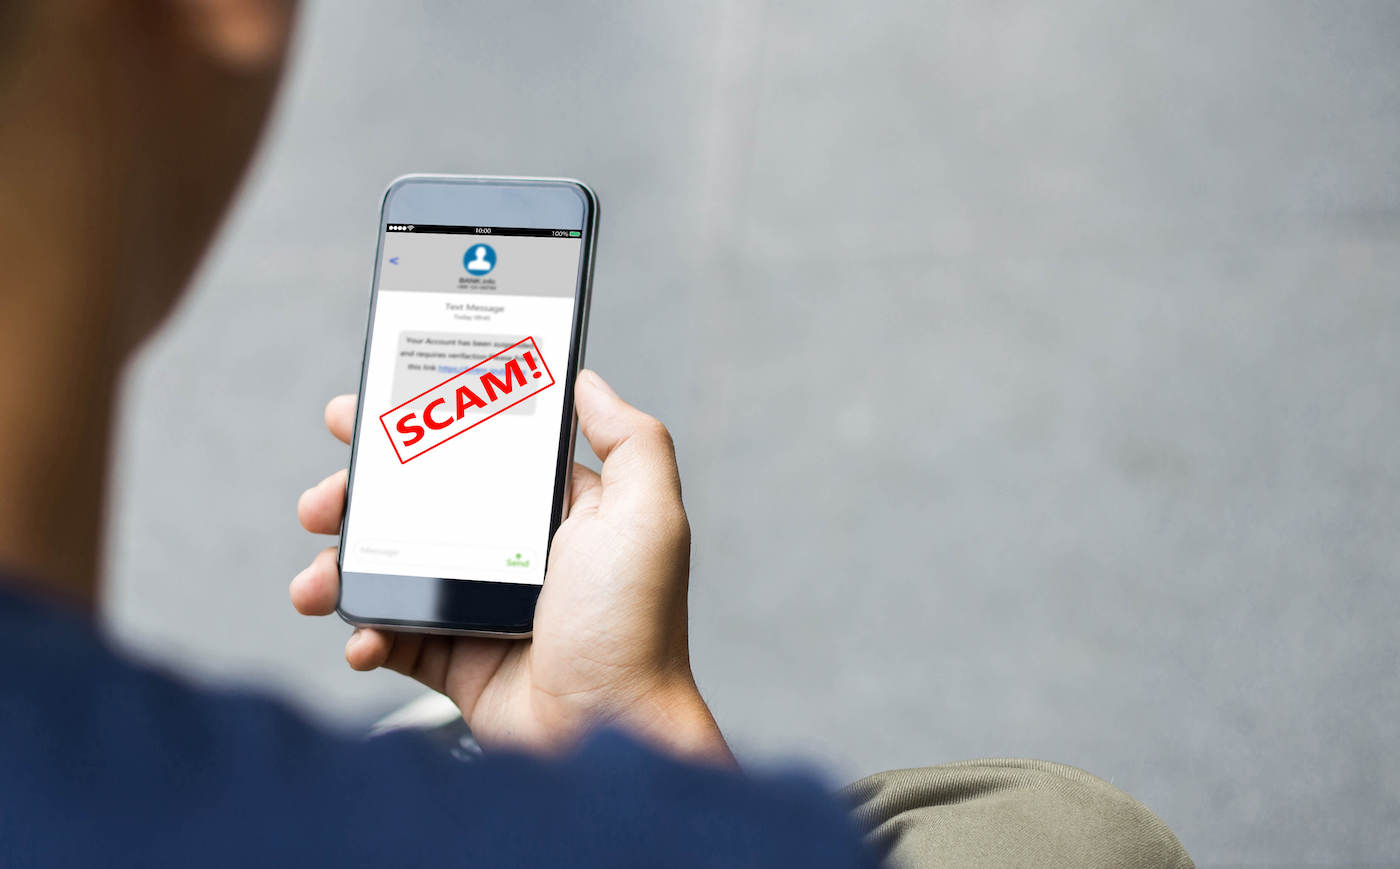 Reviews can warn you about potential scams or bad businesses